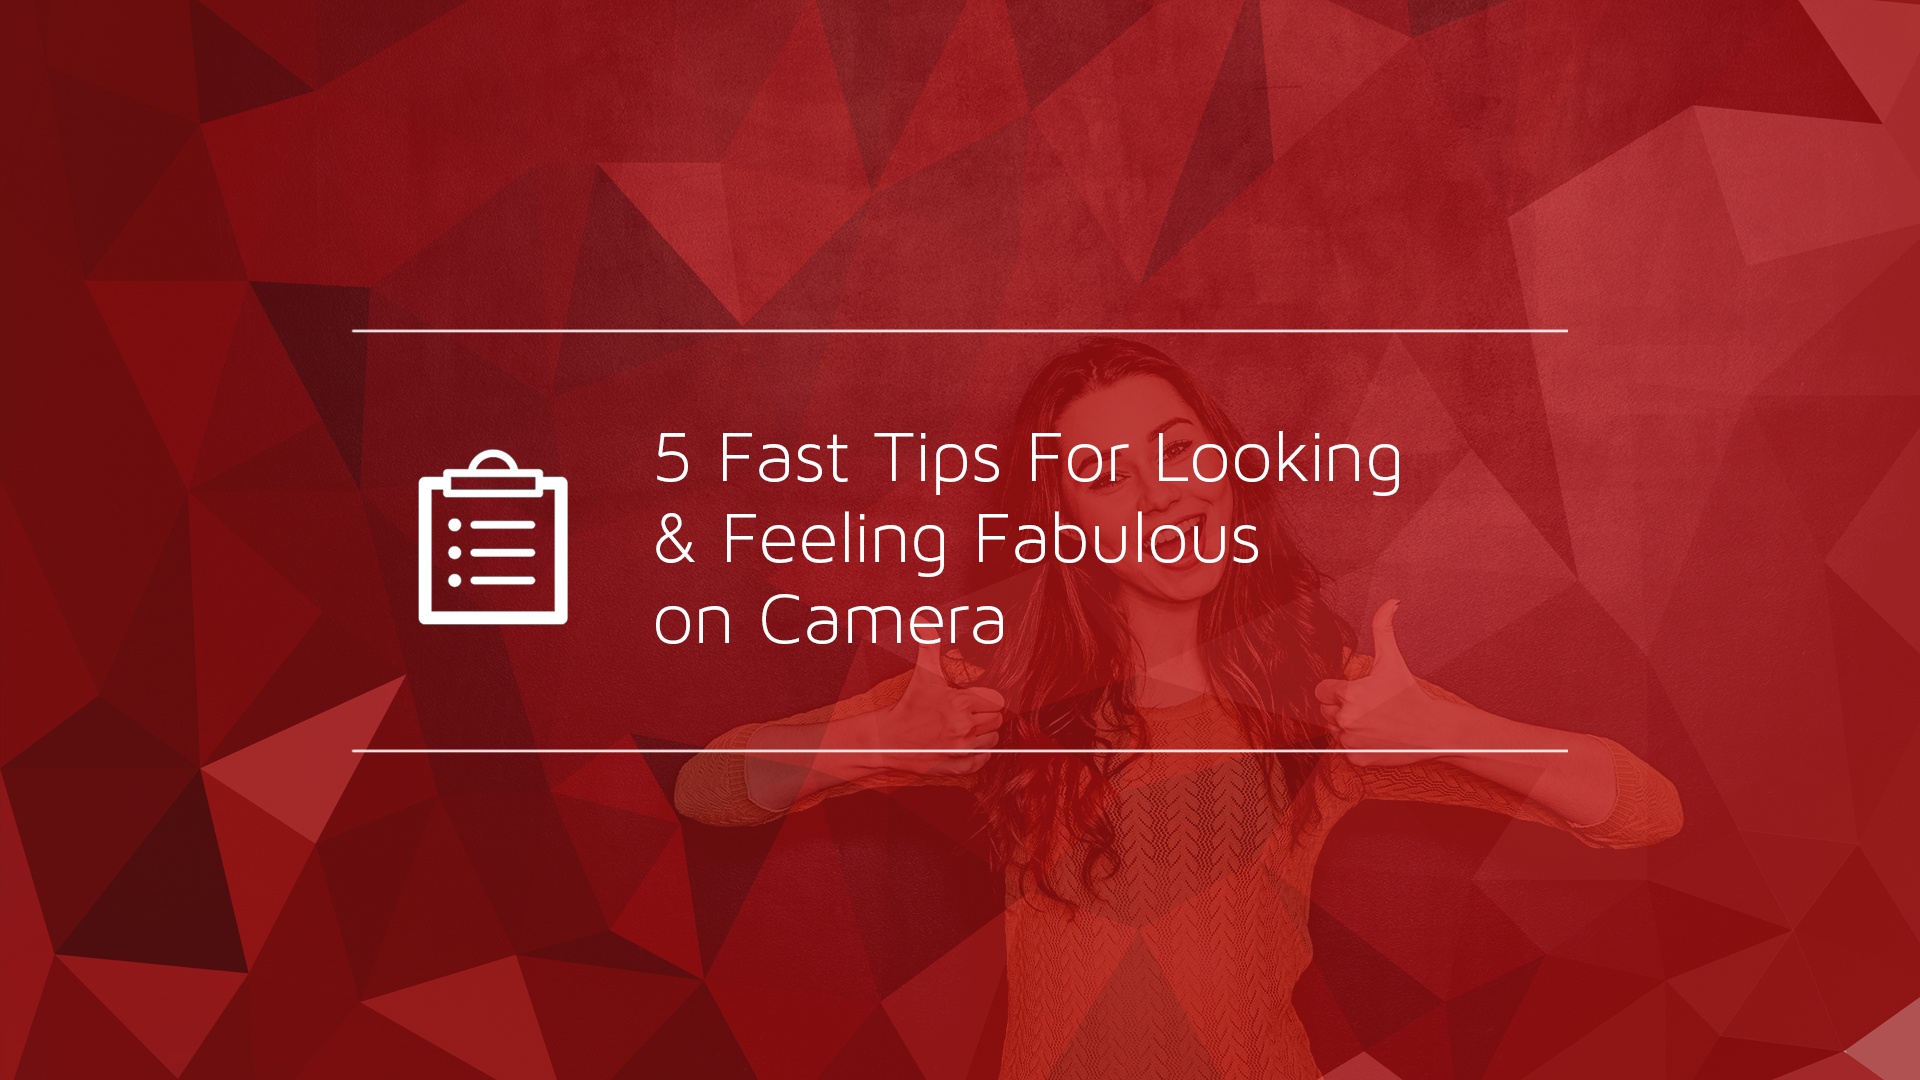 5 Fast Tips For Looking & Feeling Fabulous on Camera-1.jpg